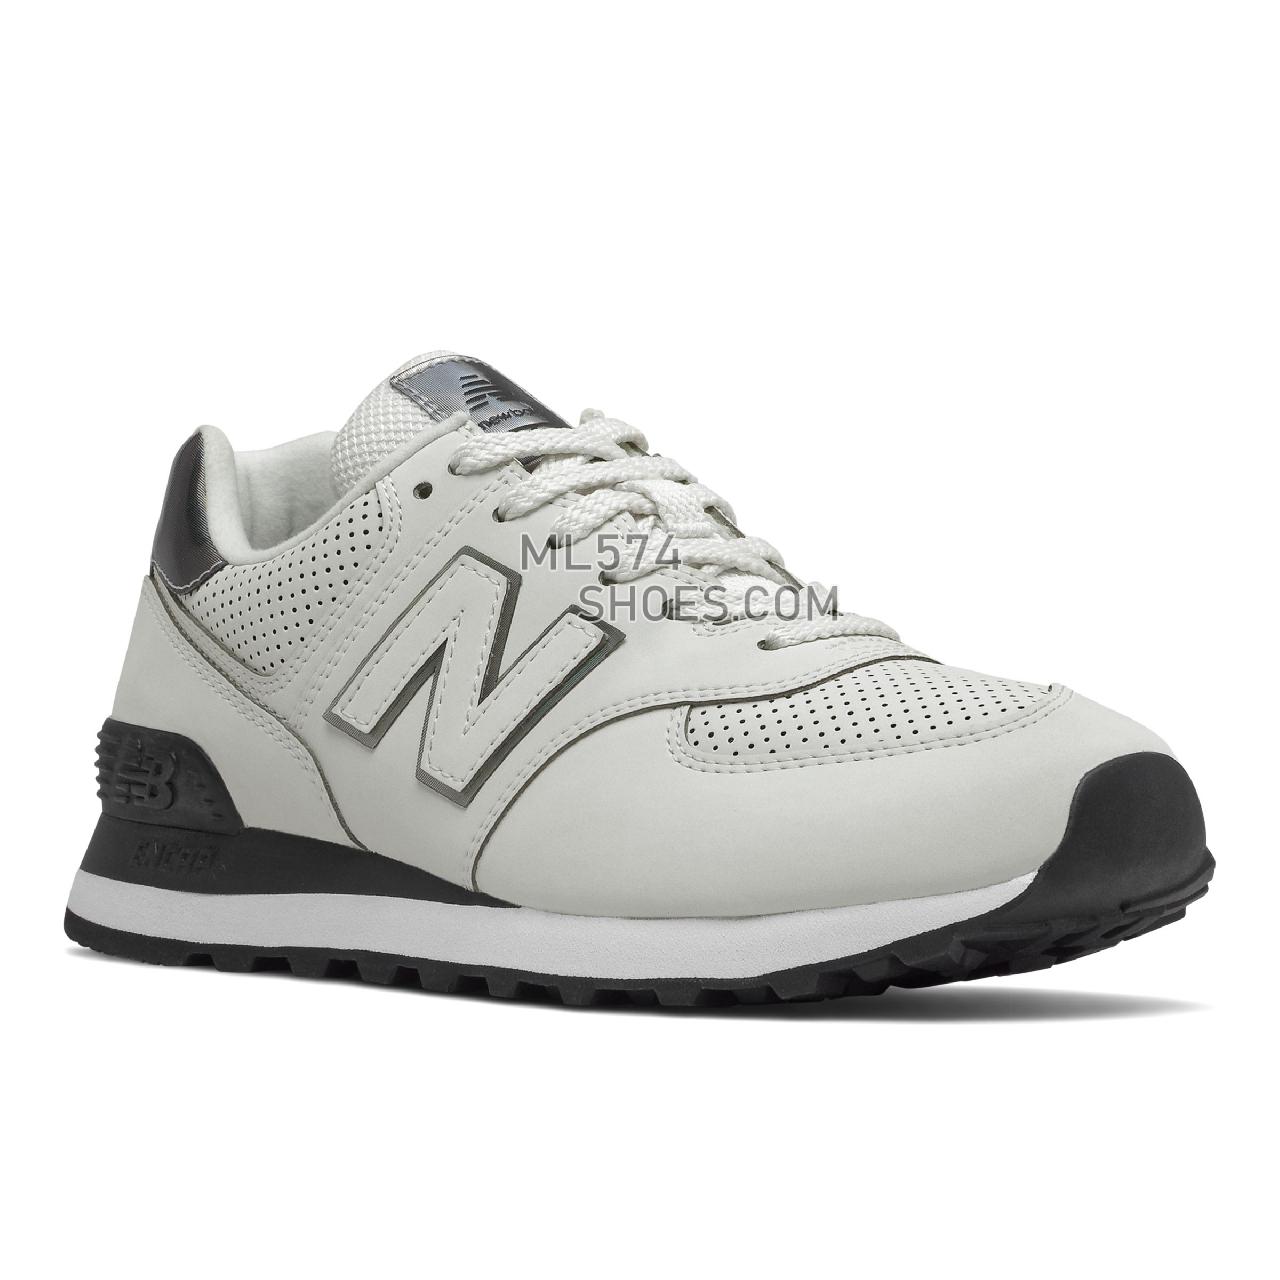 New Balance 574 - Women's Classic Sneakers - Grey with Black - WL574DN2